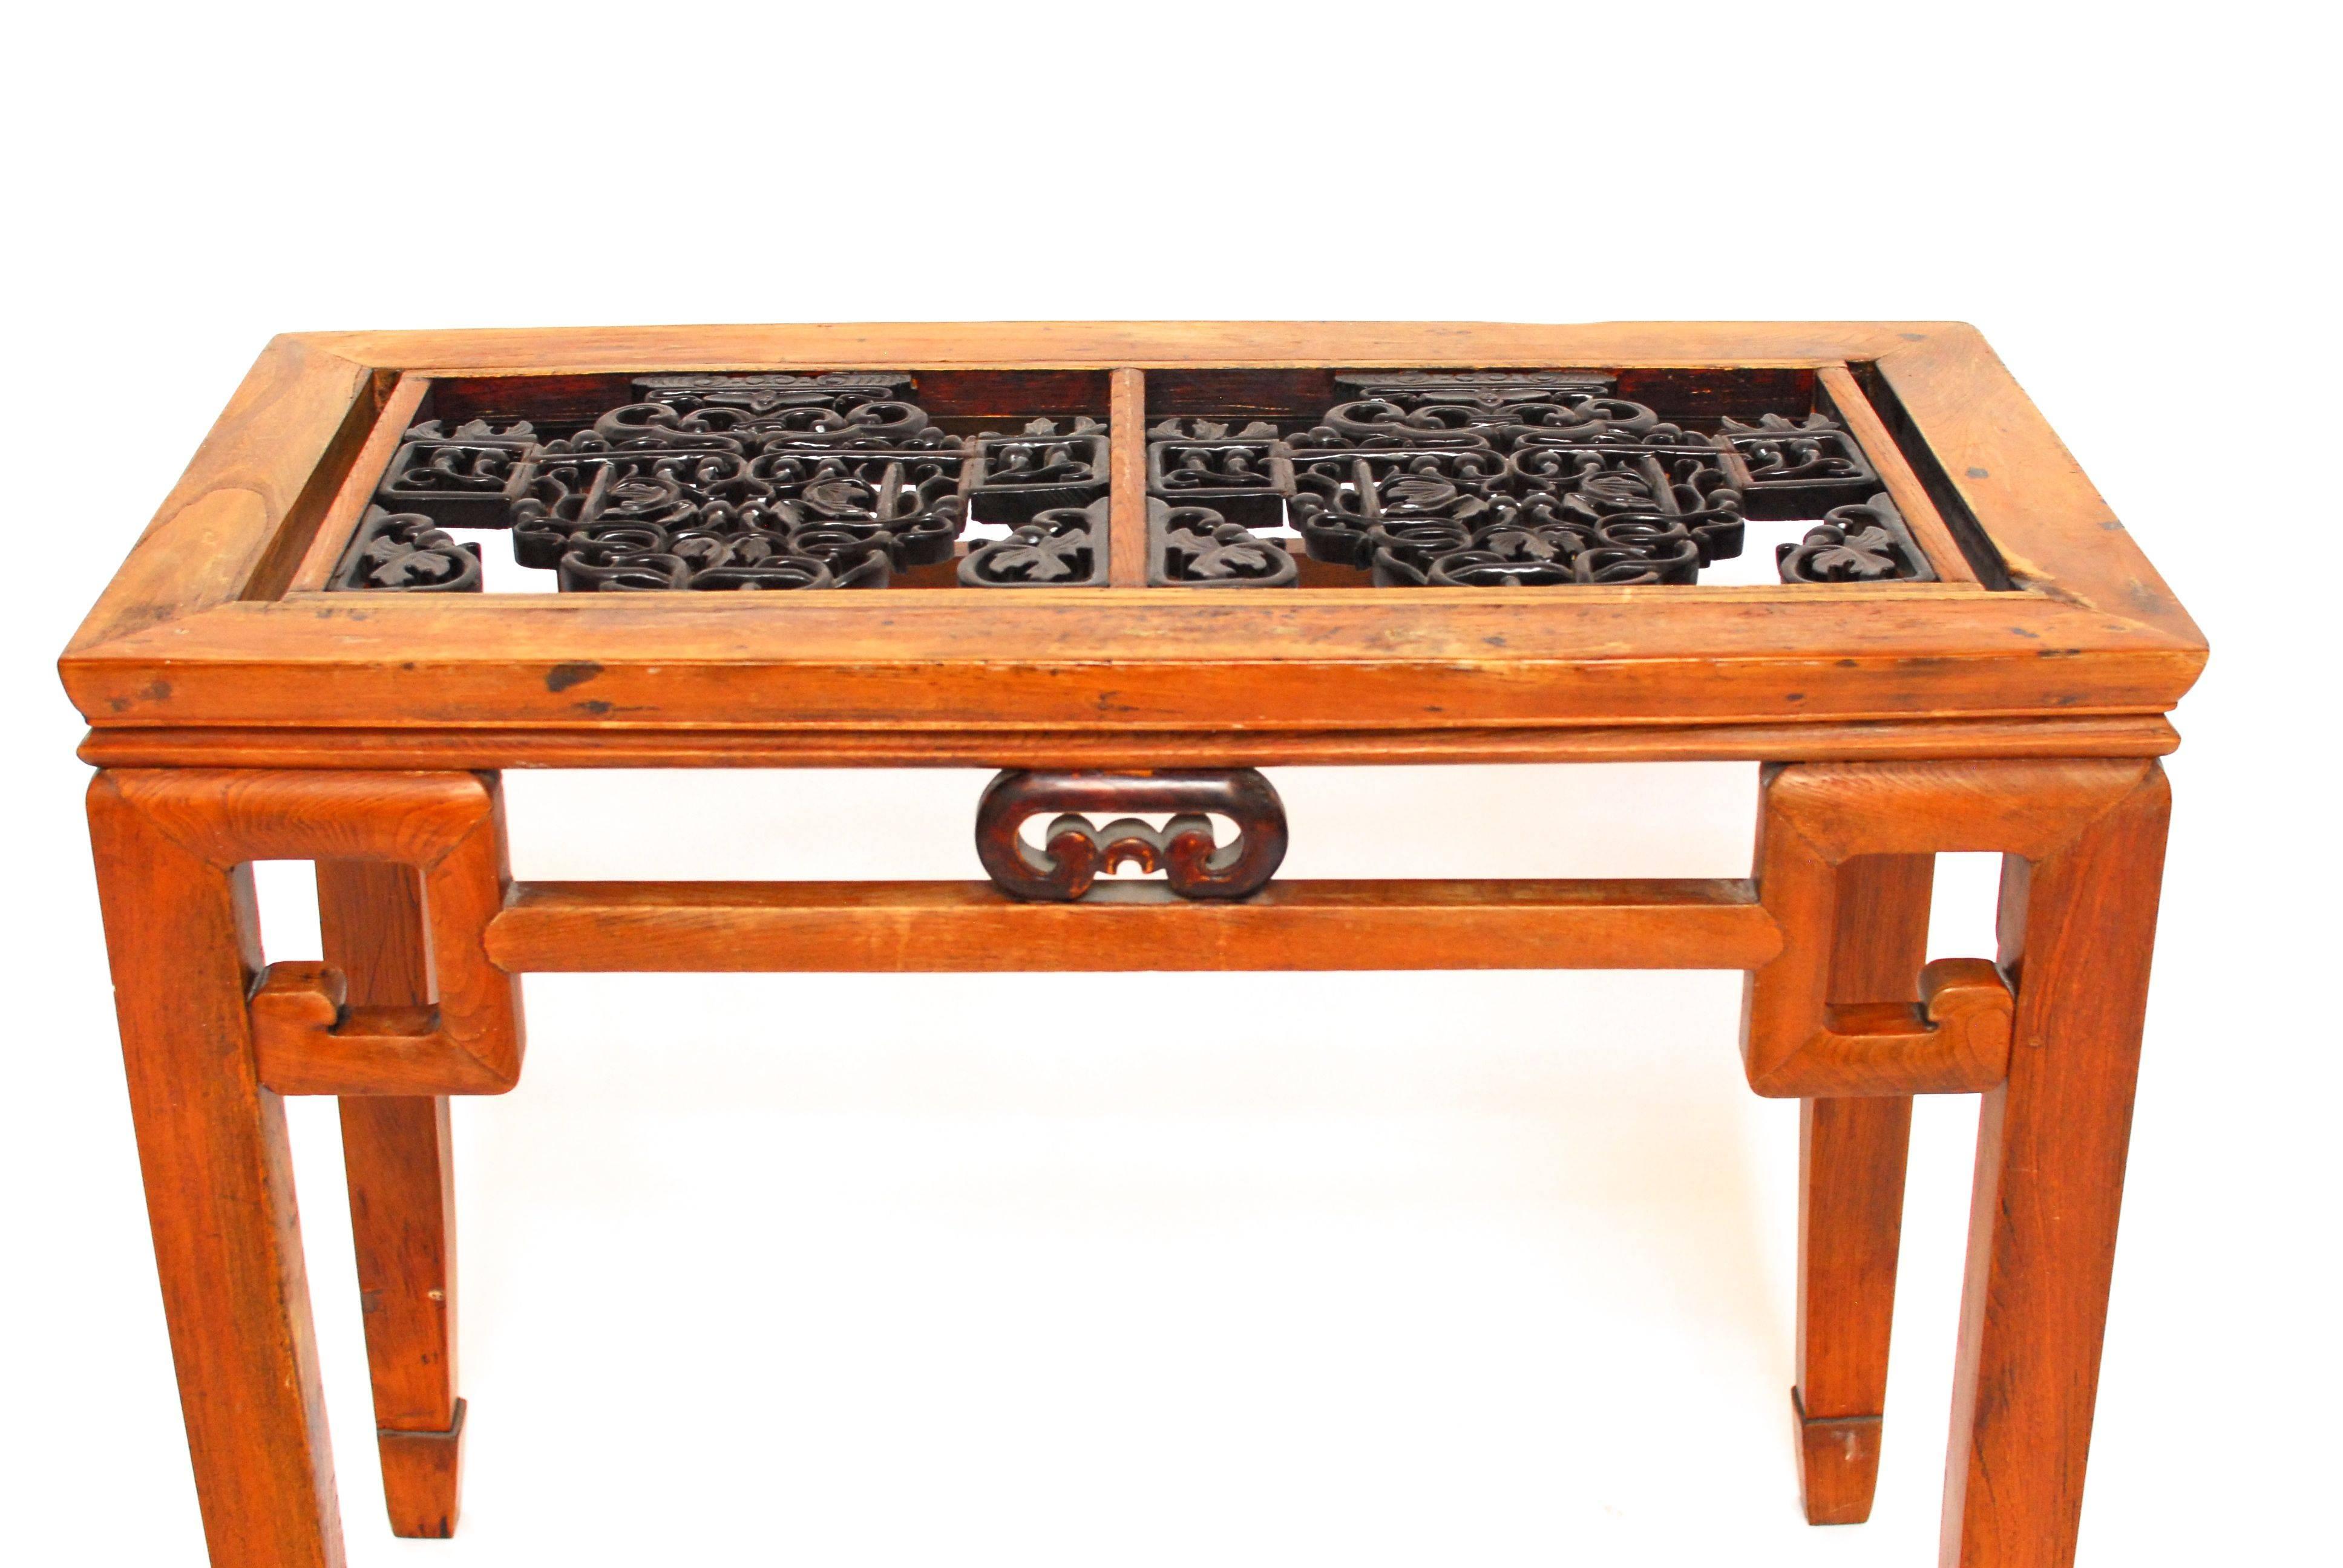 Unique Chinese hardwood carved Greek key entry table with an ornate window panel inlay. It sits on square legs with Greek key shaped details and straight stretchers, standing on subtle horse feet. The window panel has an intricate carving with a